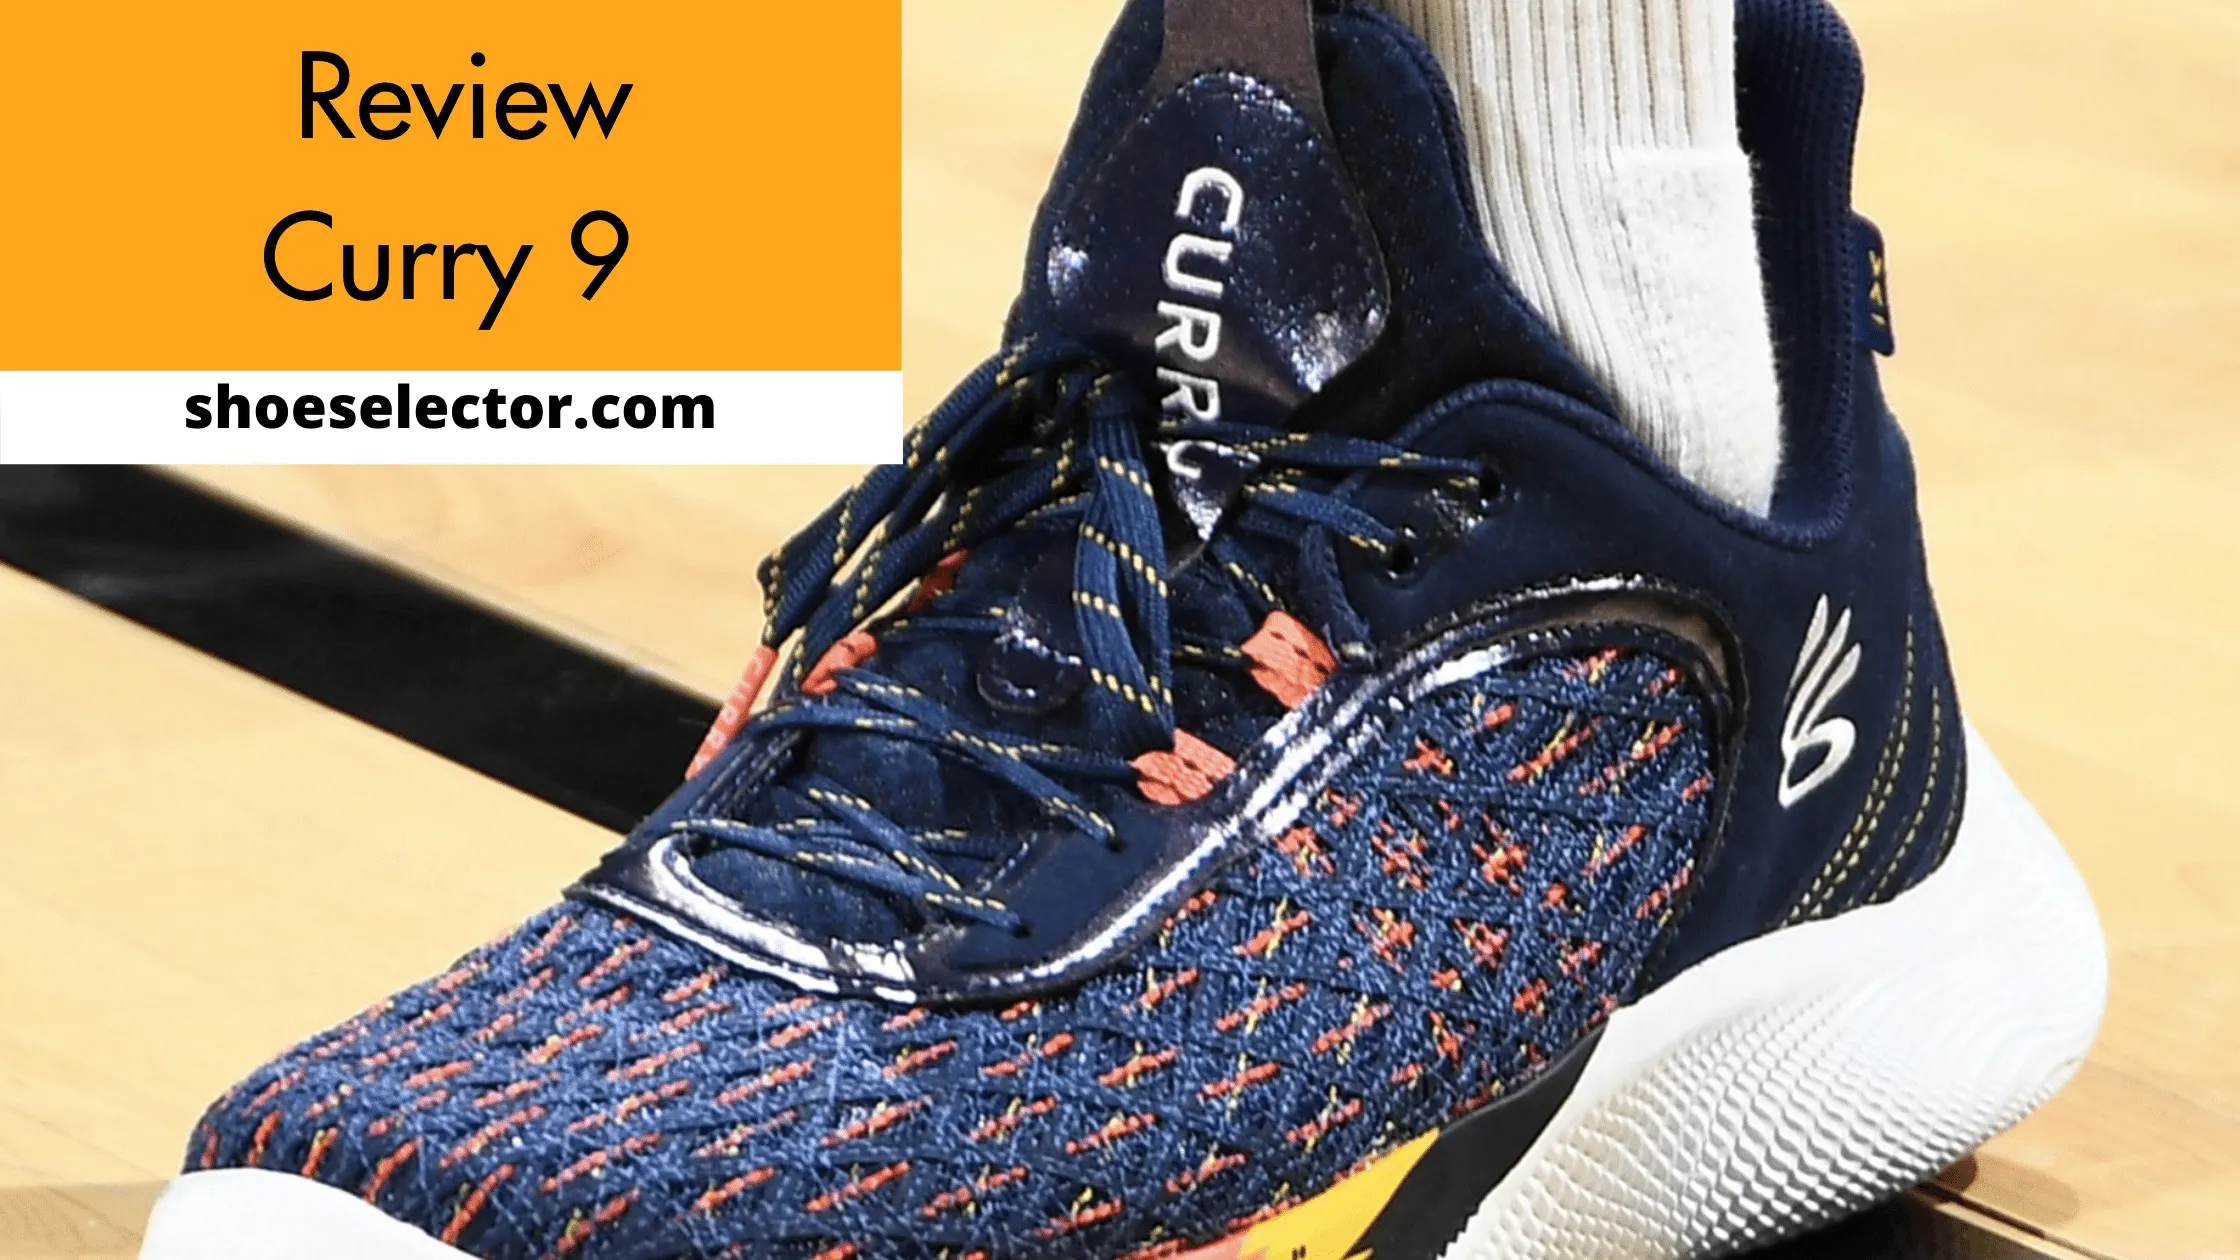 Curry 9 Review - Comprehensive Guide